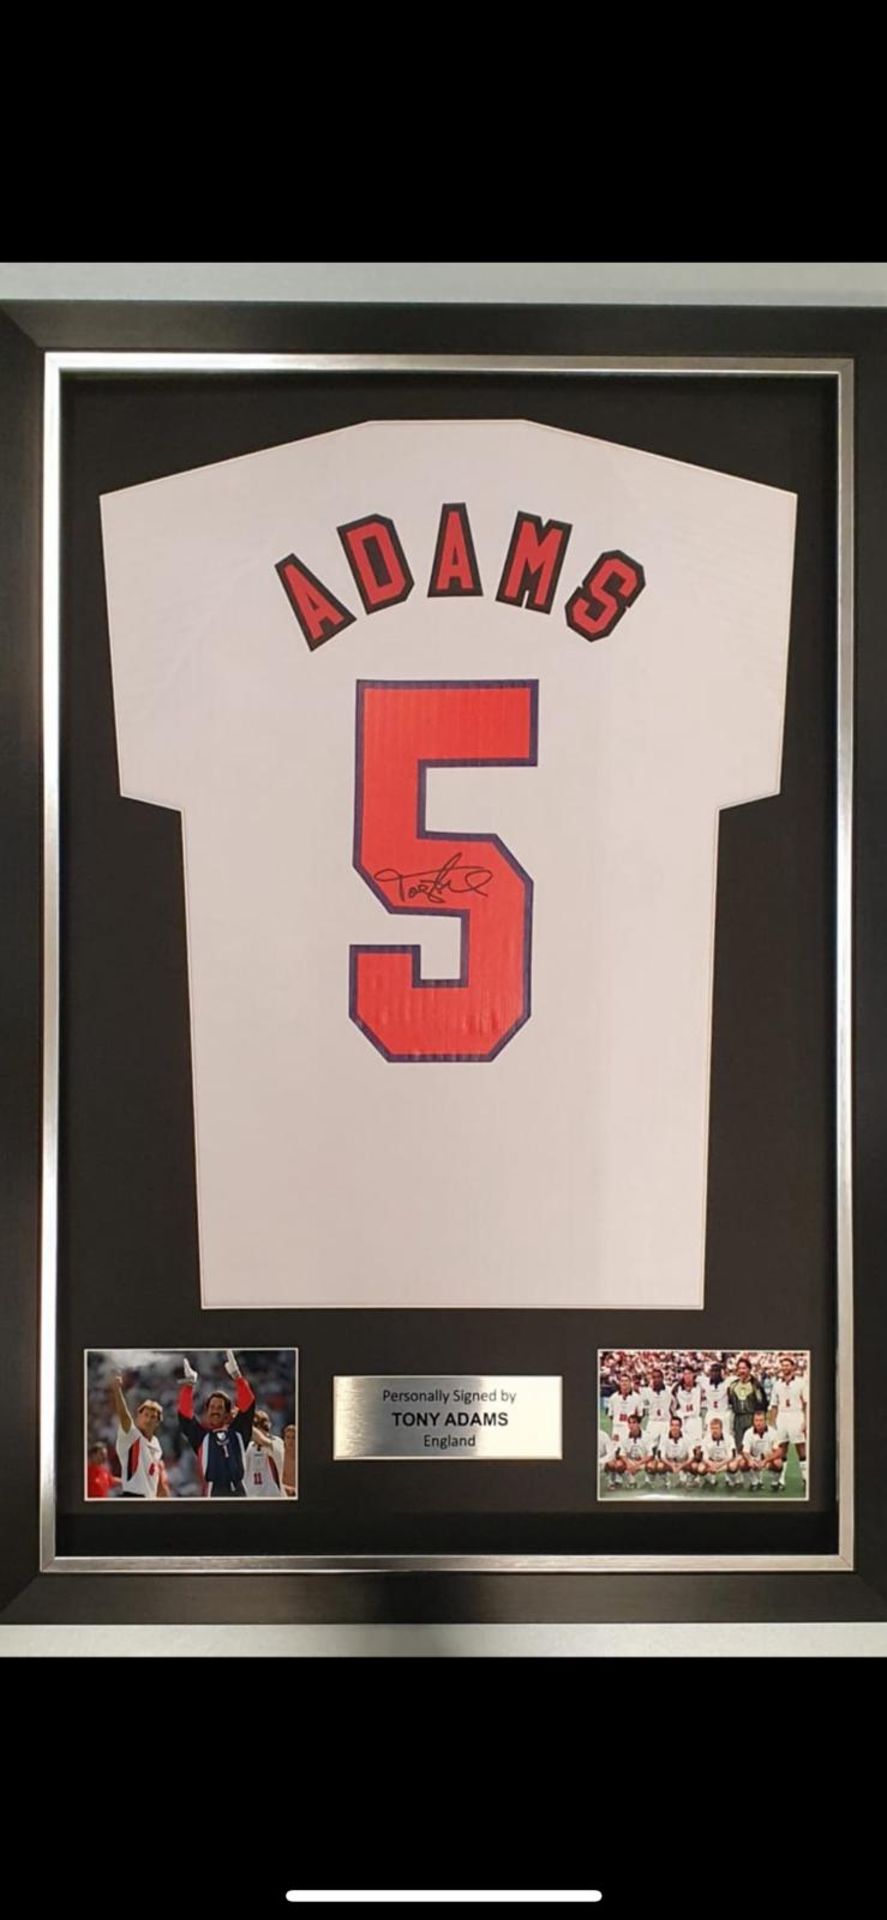 Tony Adams Signed And Framed England 1998 World Cup Shirt Supplied with Certificate Of Authenticity